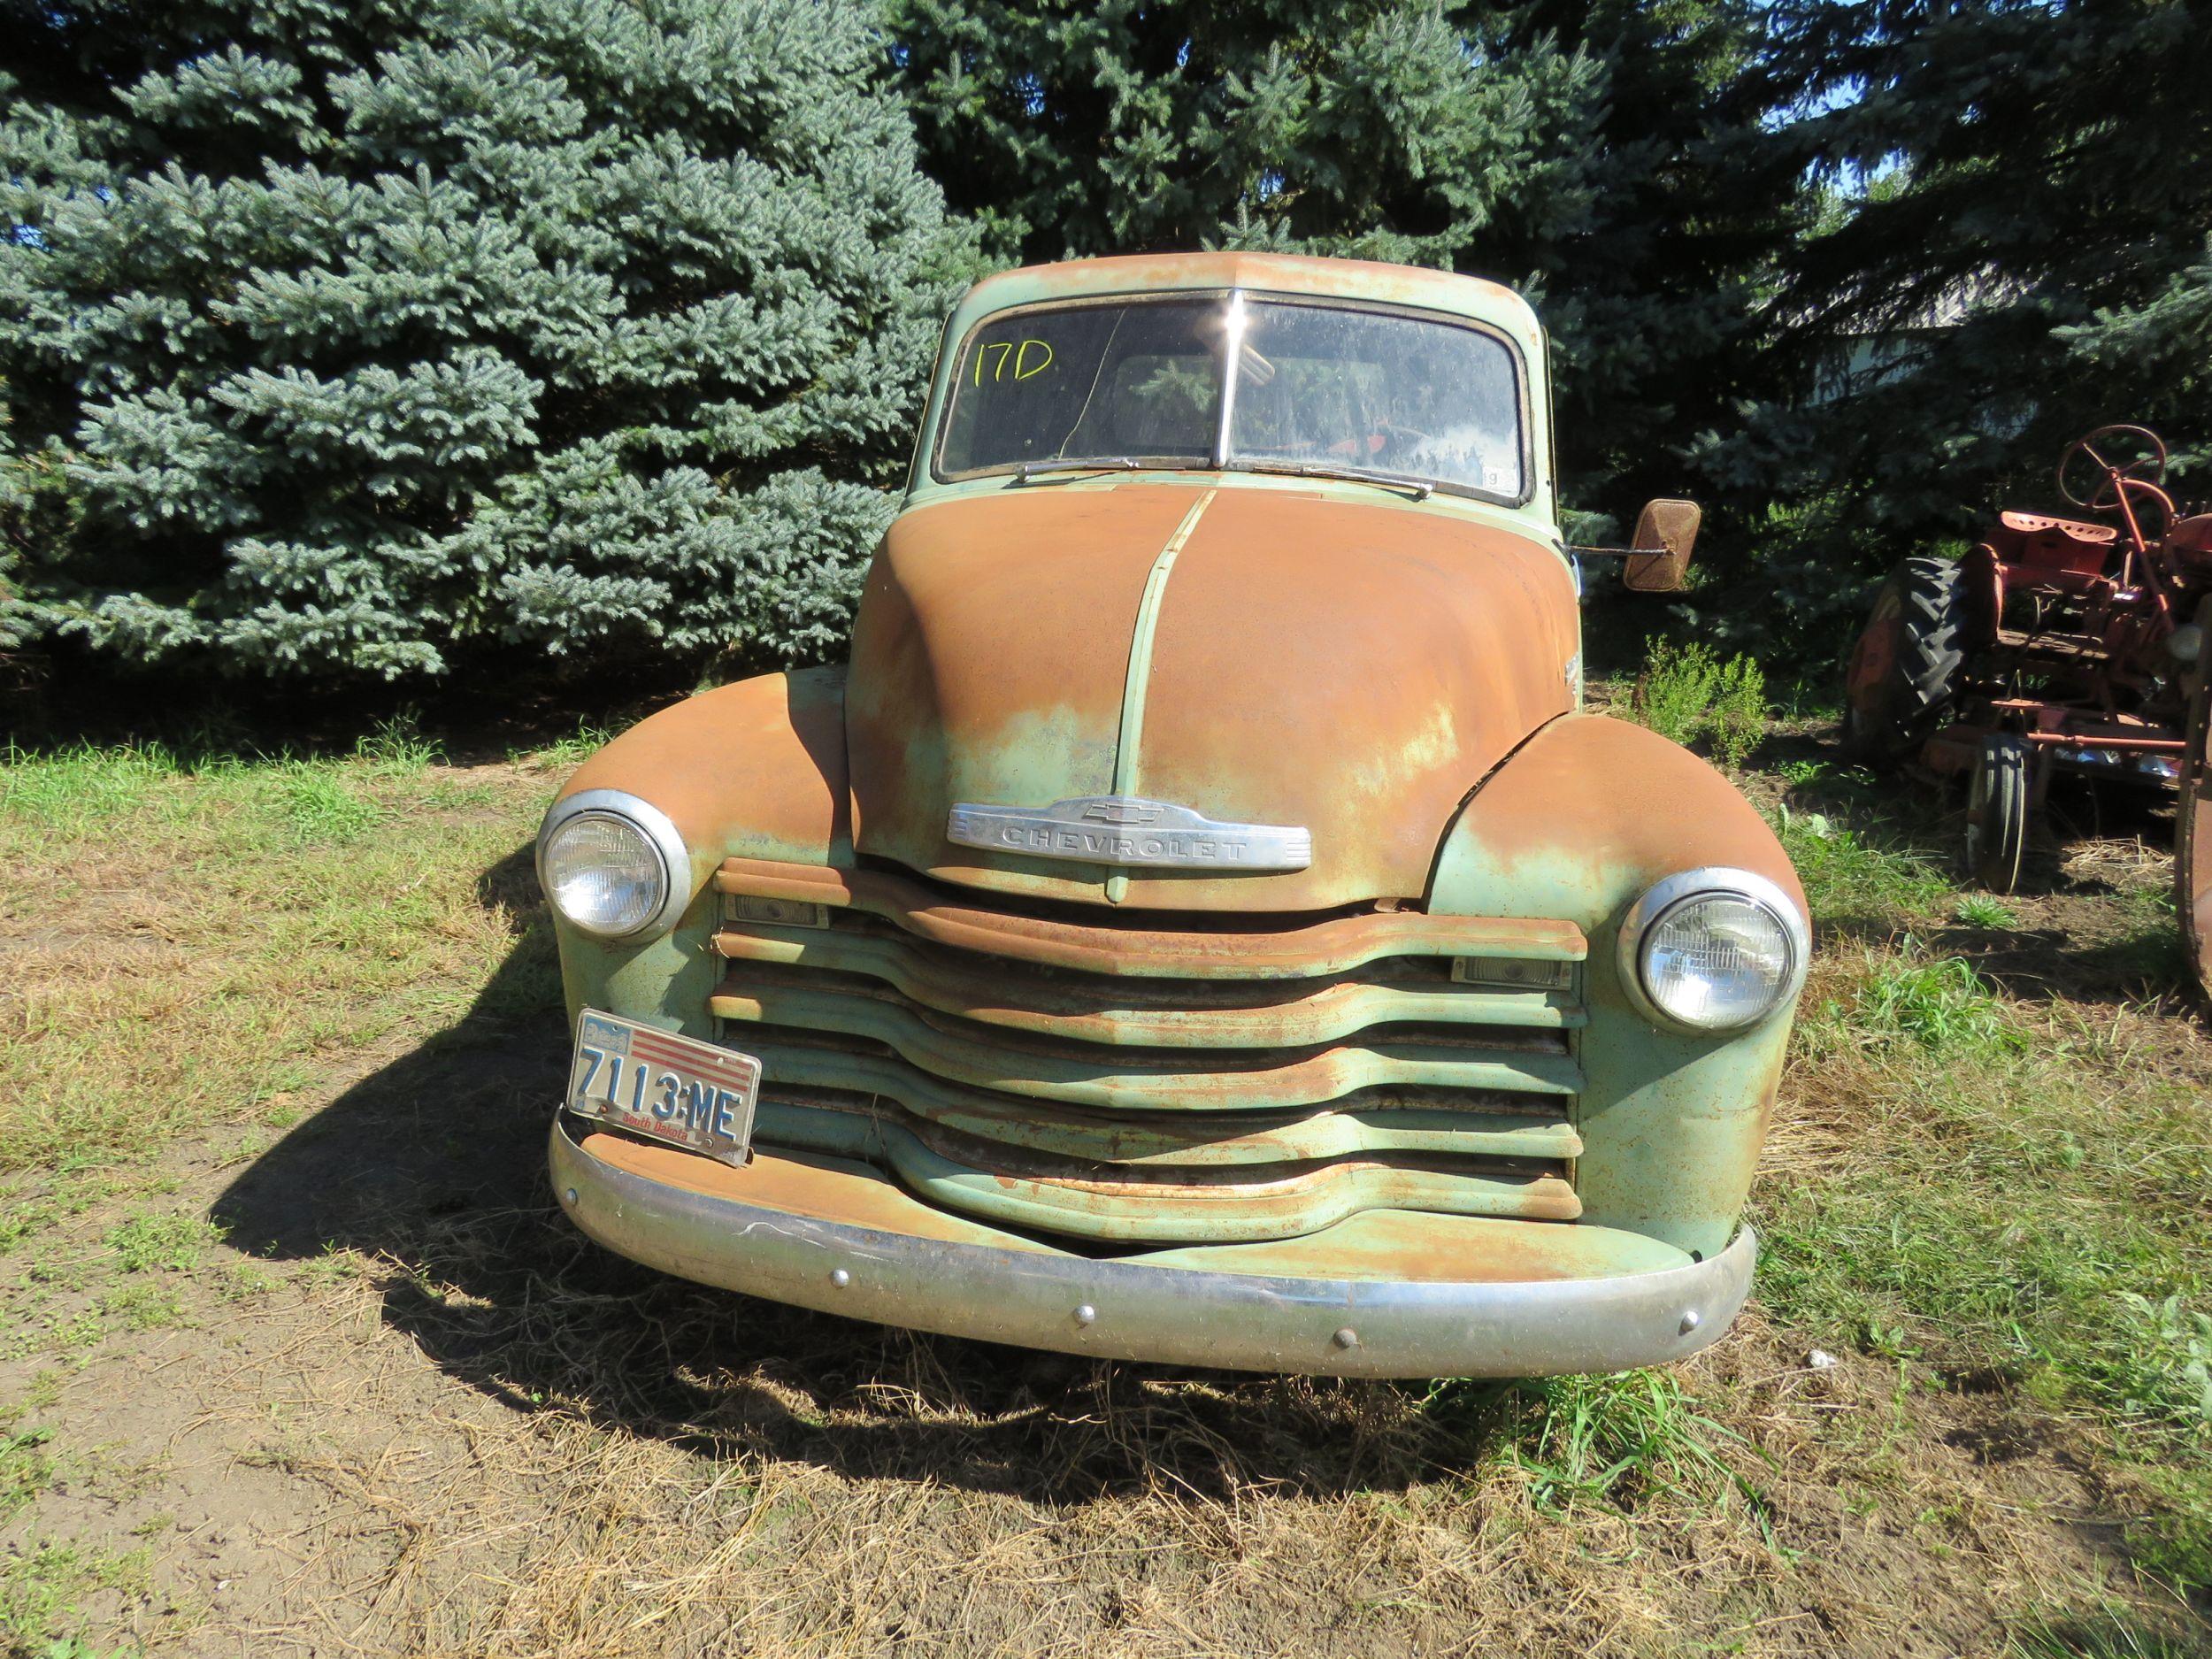 1950 Chevrolet 3100 Series Pickup for Rod or Restore